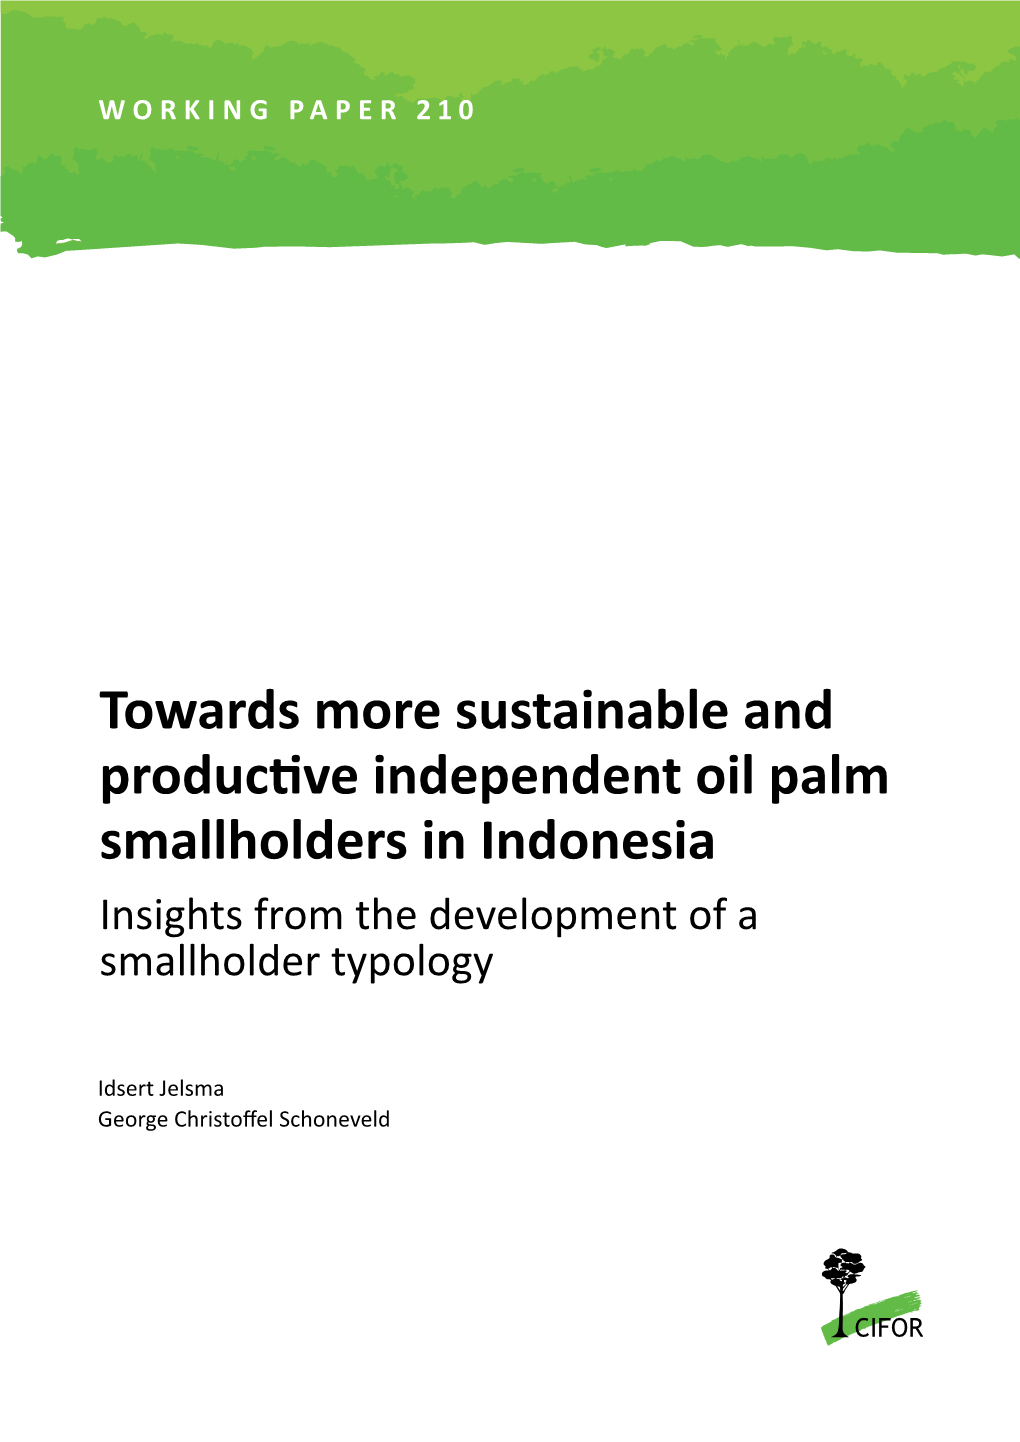 Towards More Sustainable and Productive Independent Oil Palm Smallholders in Indonesia Insights from the Development of a Smallholder Typology